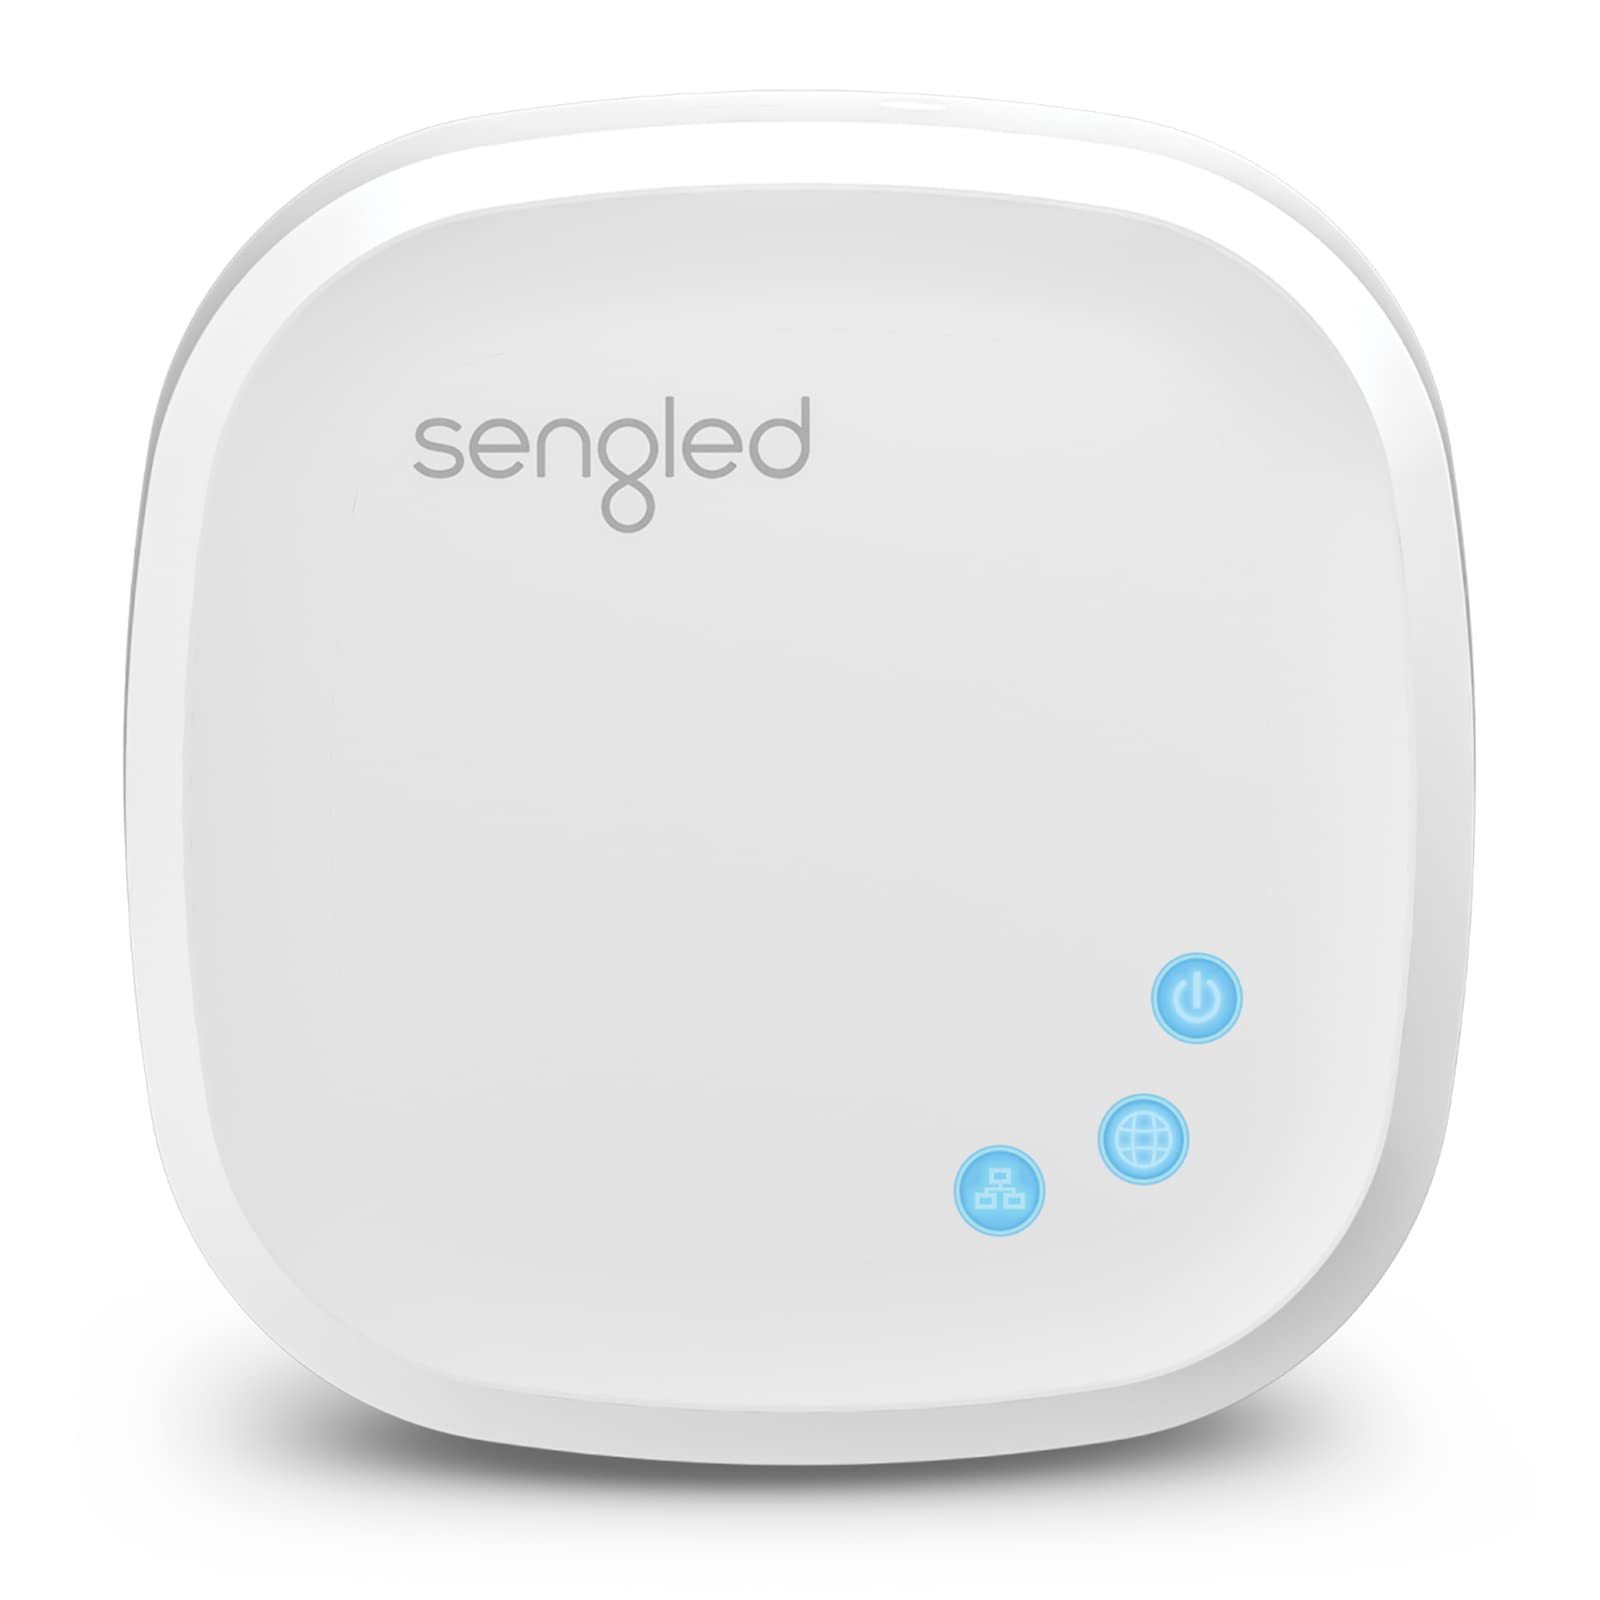 Sengled Use Products, Compatible with Alexa and Google Assistant, Homekit, Siri, Smart Hub, 1 Pack, White